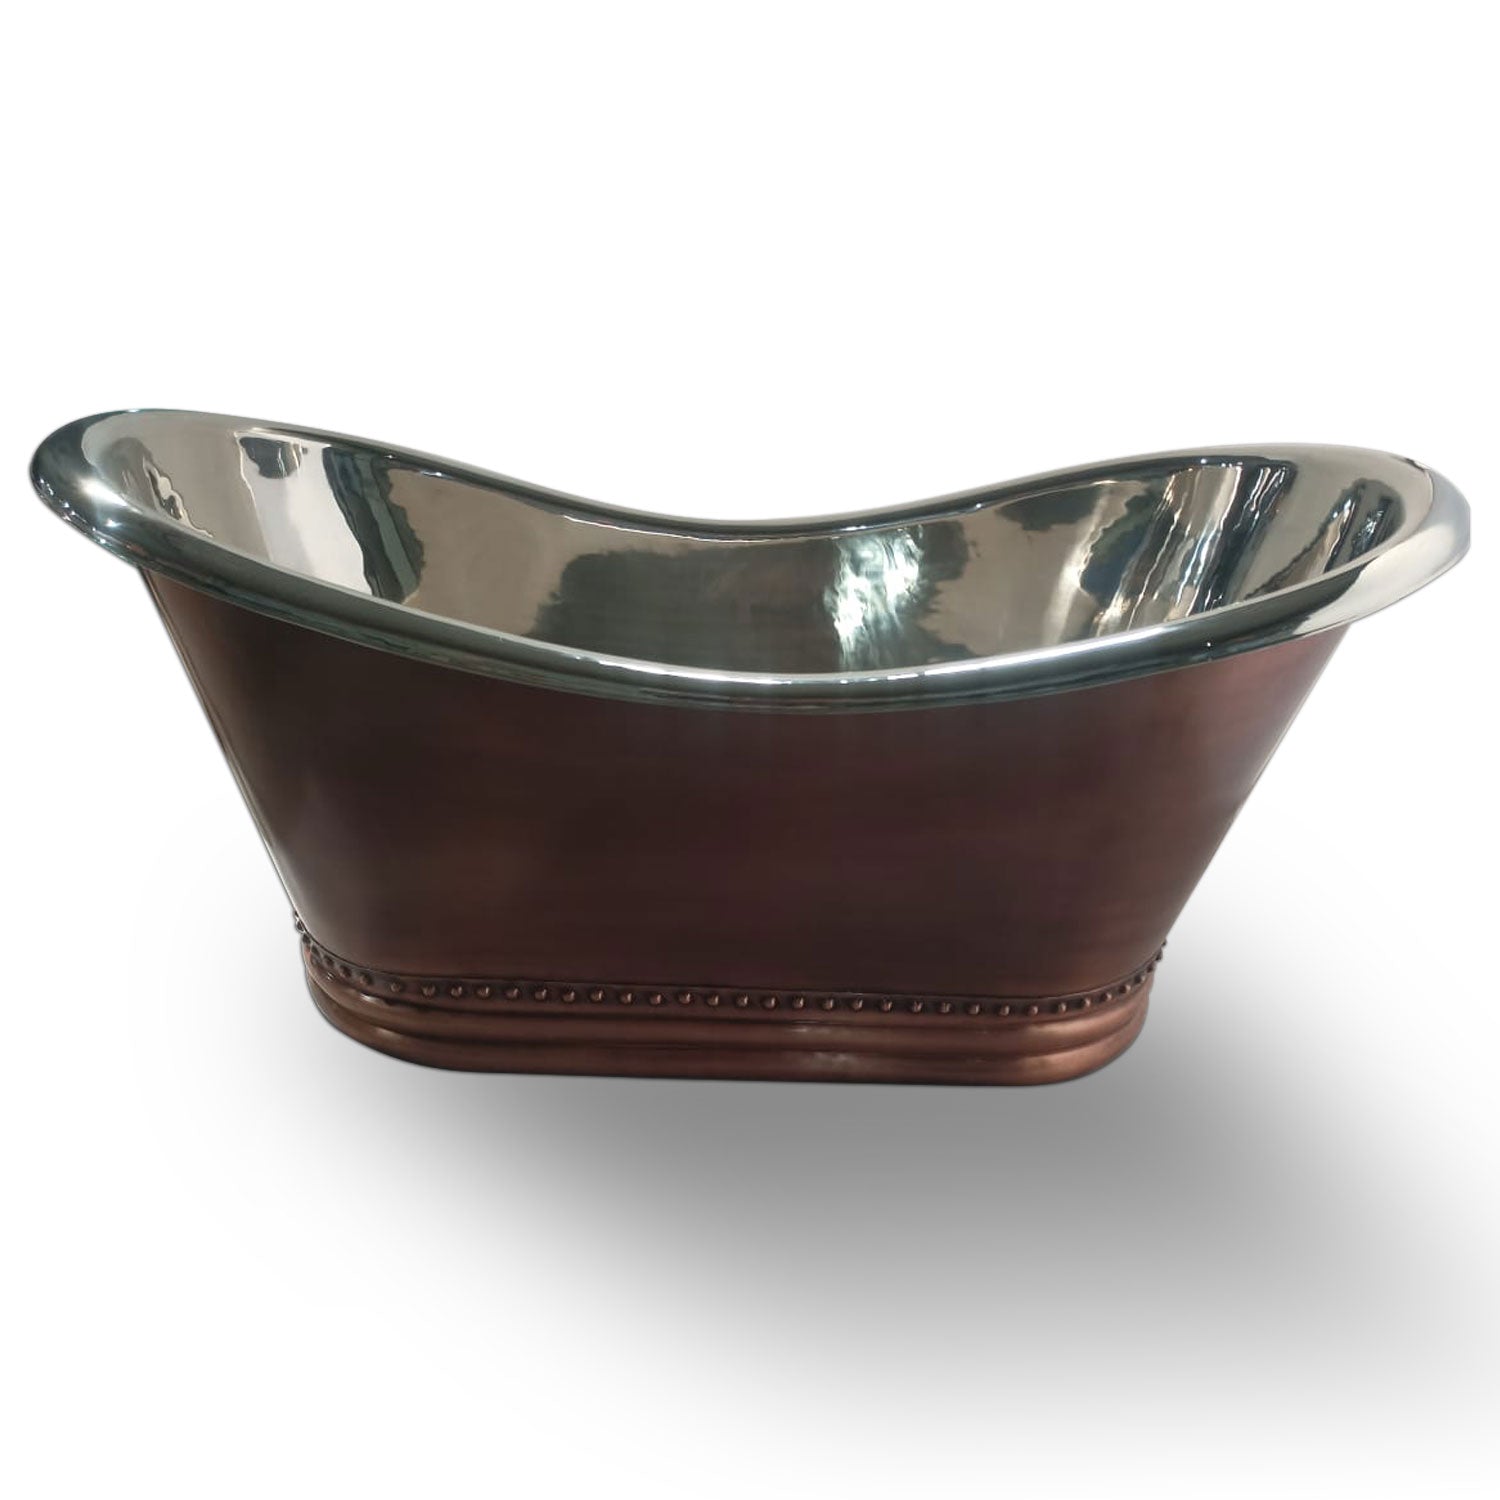 Coppersmith Creations Ribbed Base Smooth Double Slipper Nickel Interior Copper Freestanding Bathtub